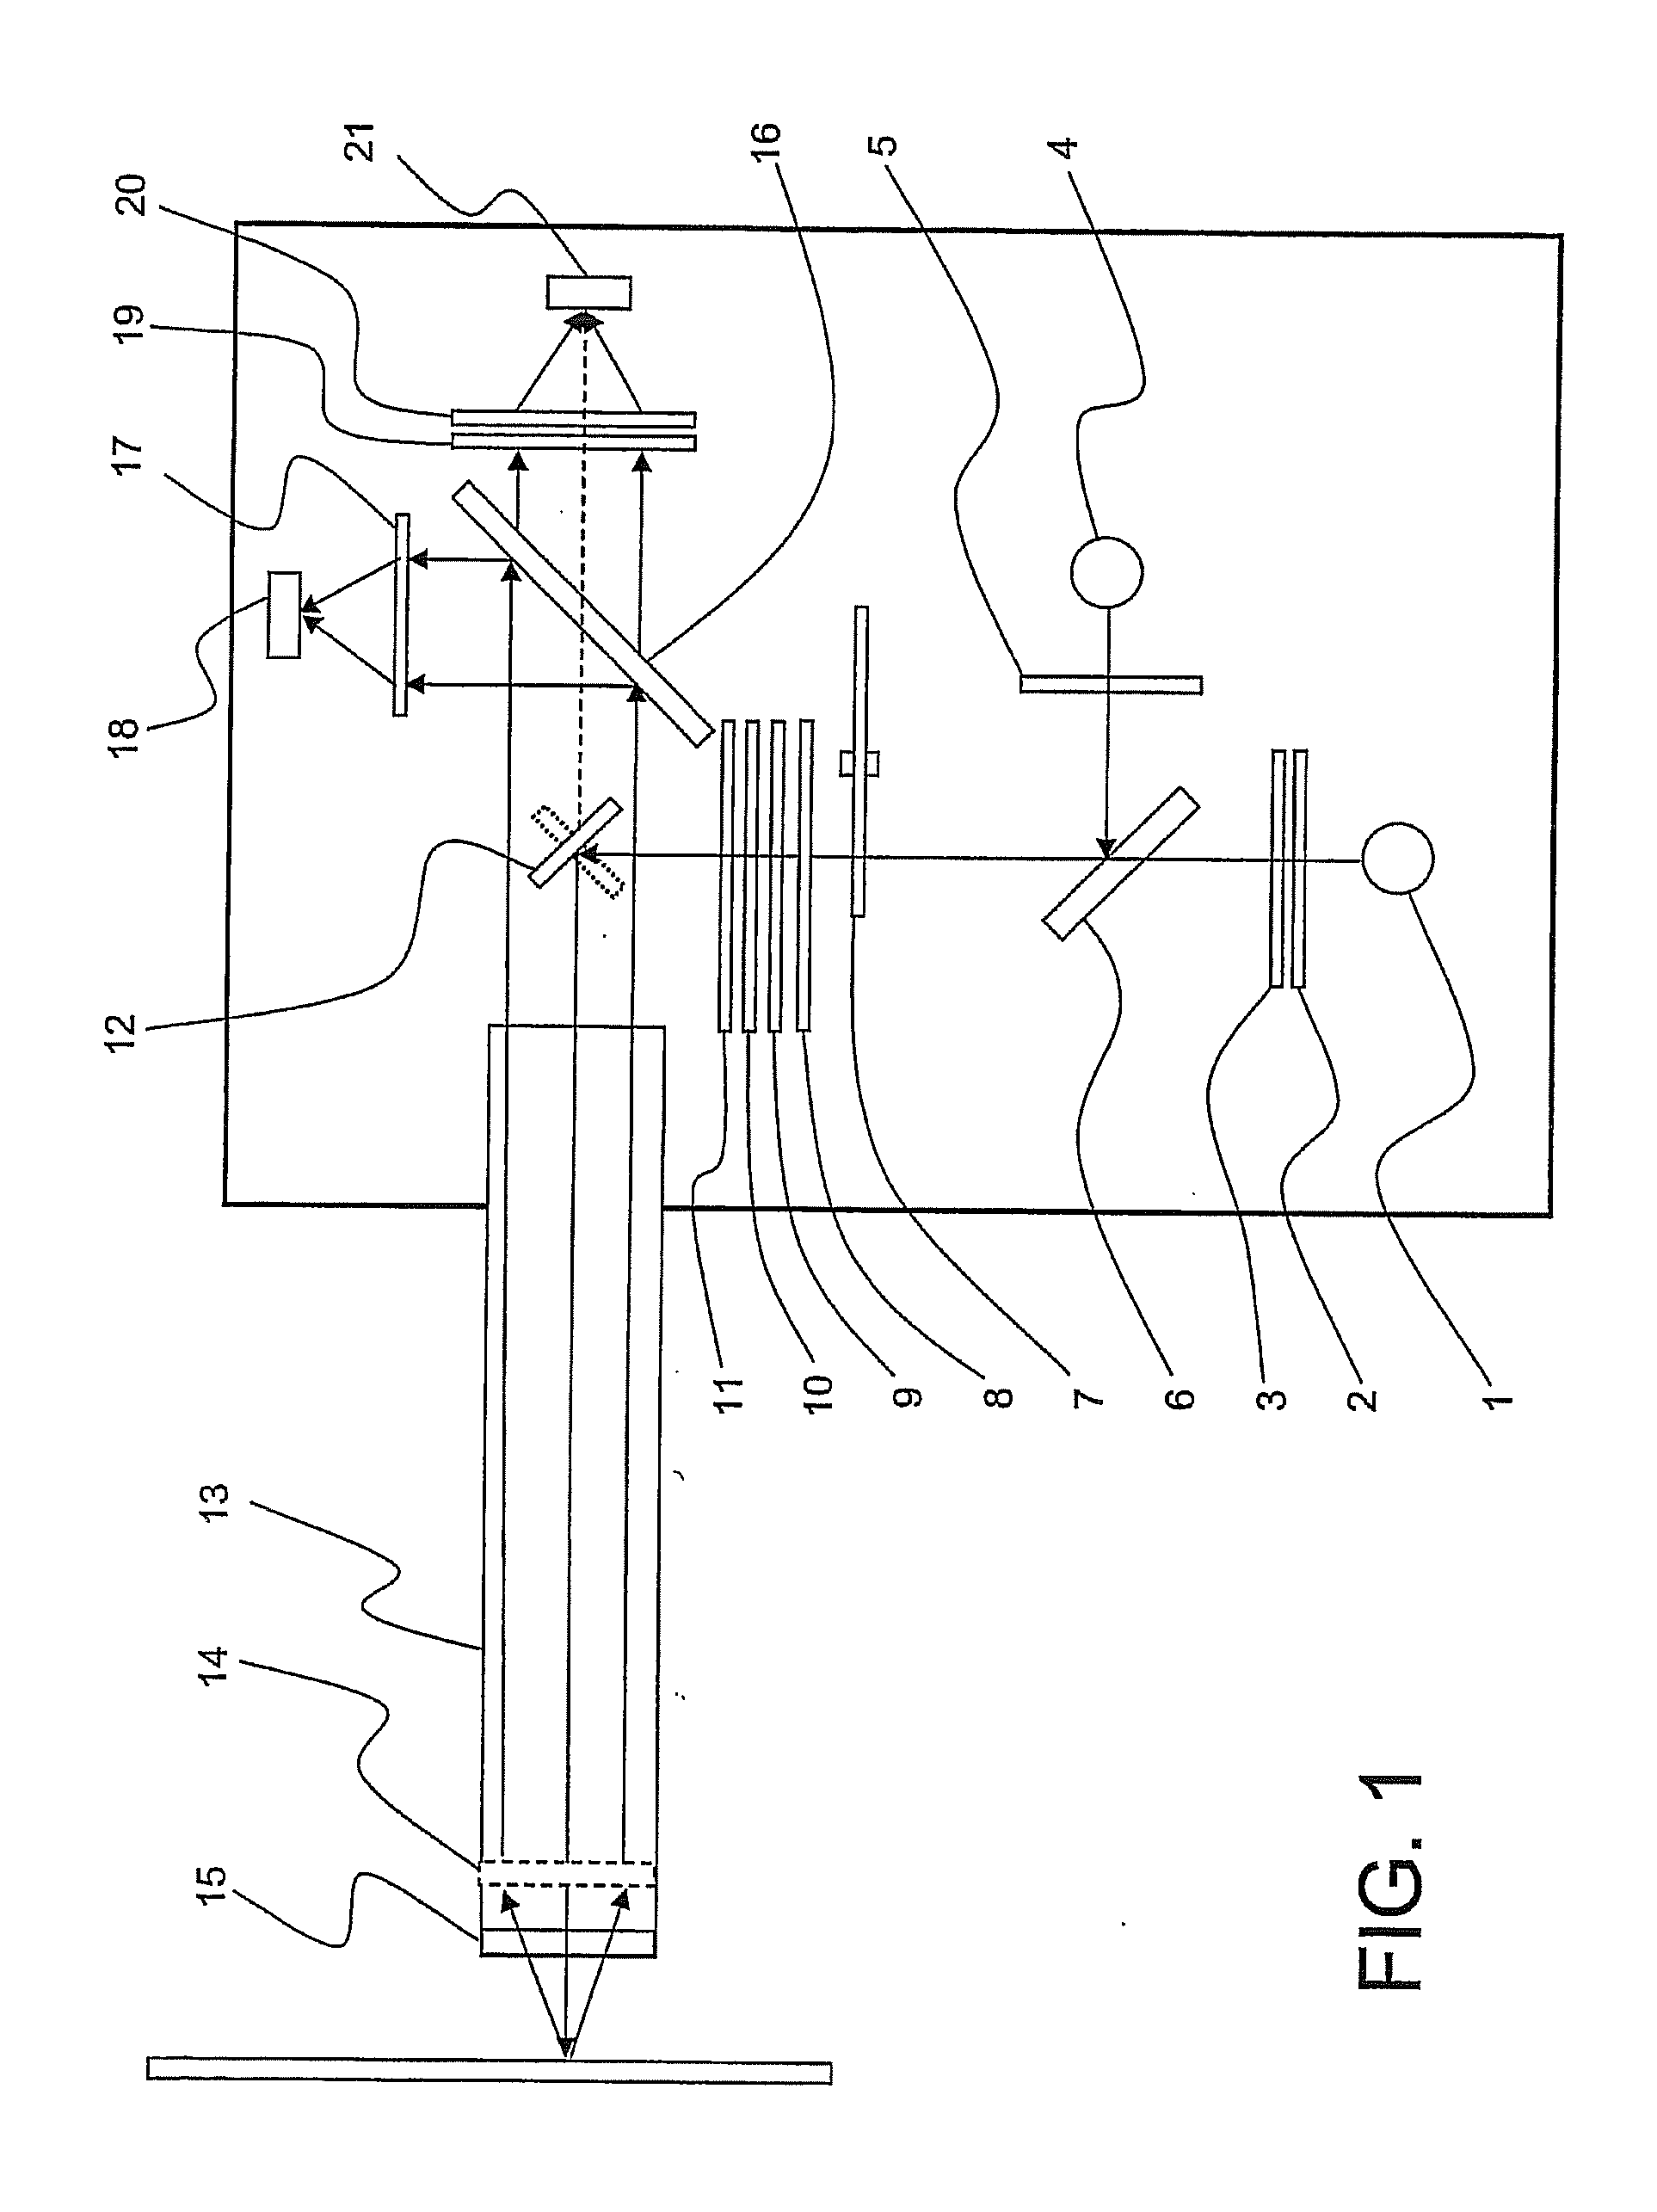 Self calibration methods for optical analysis system